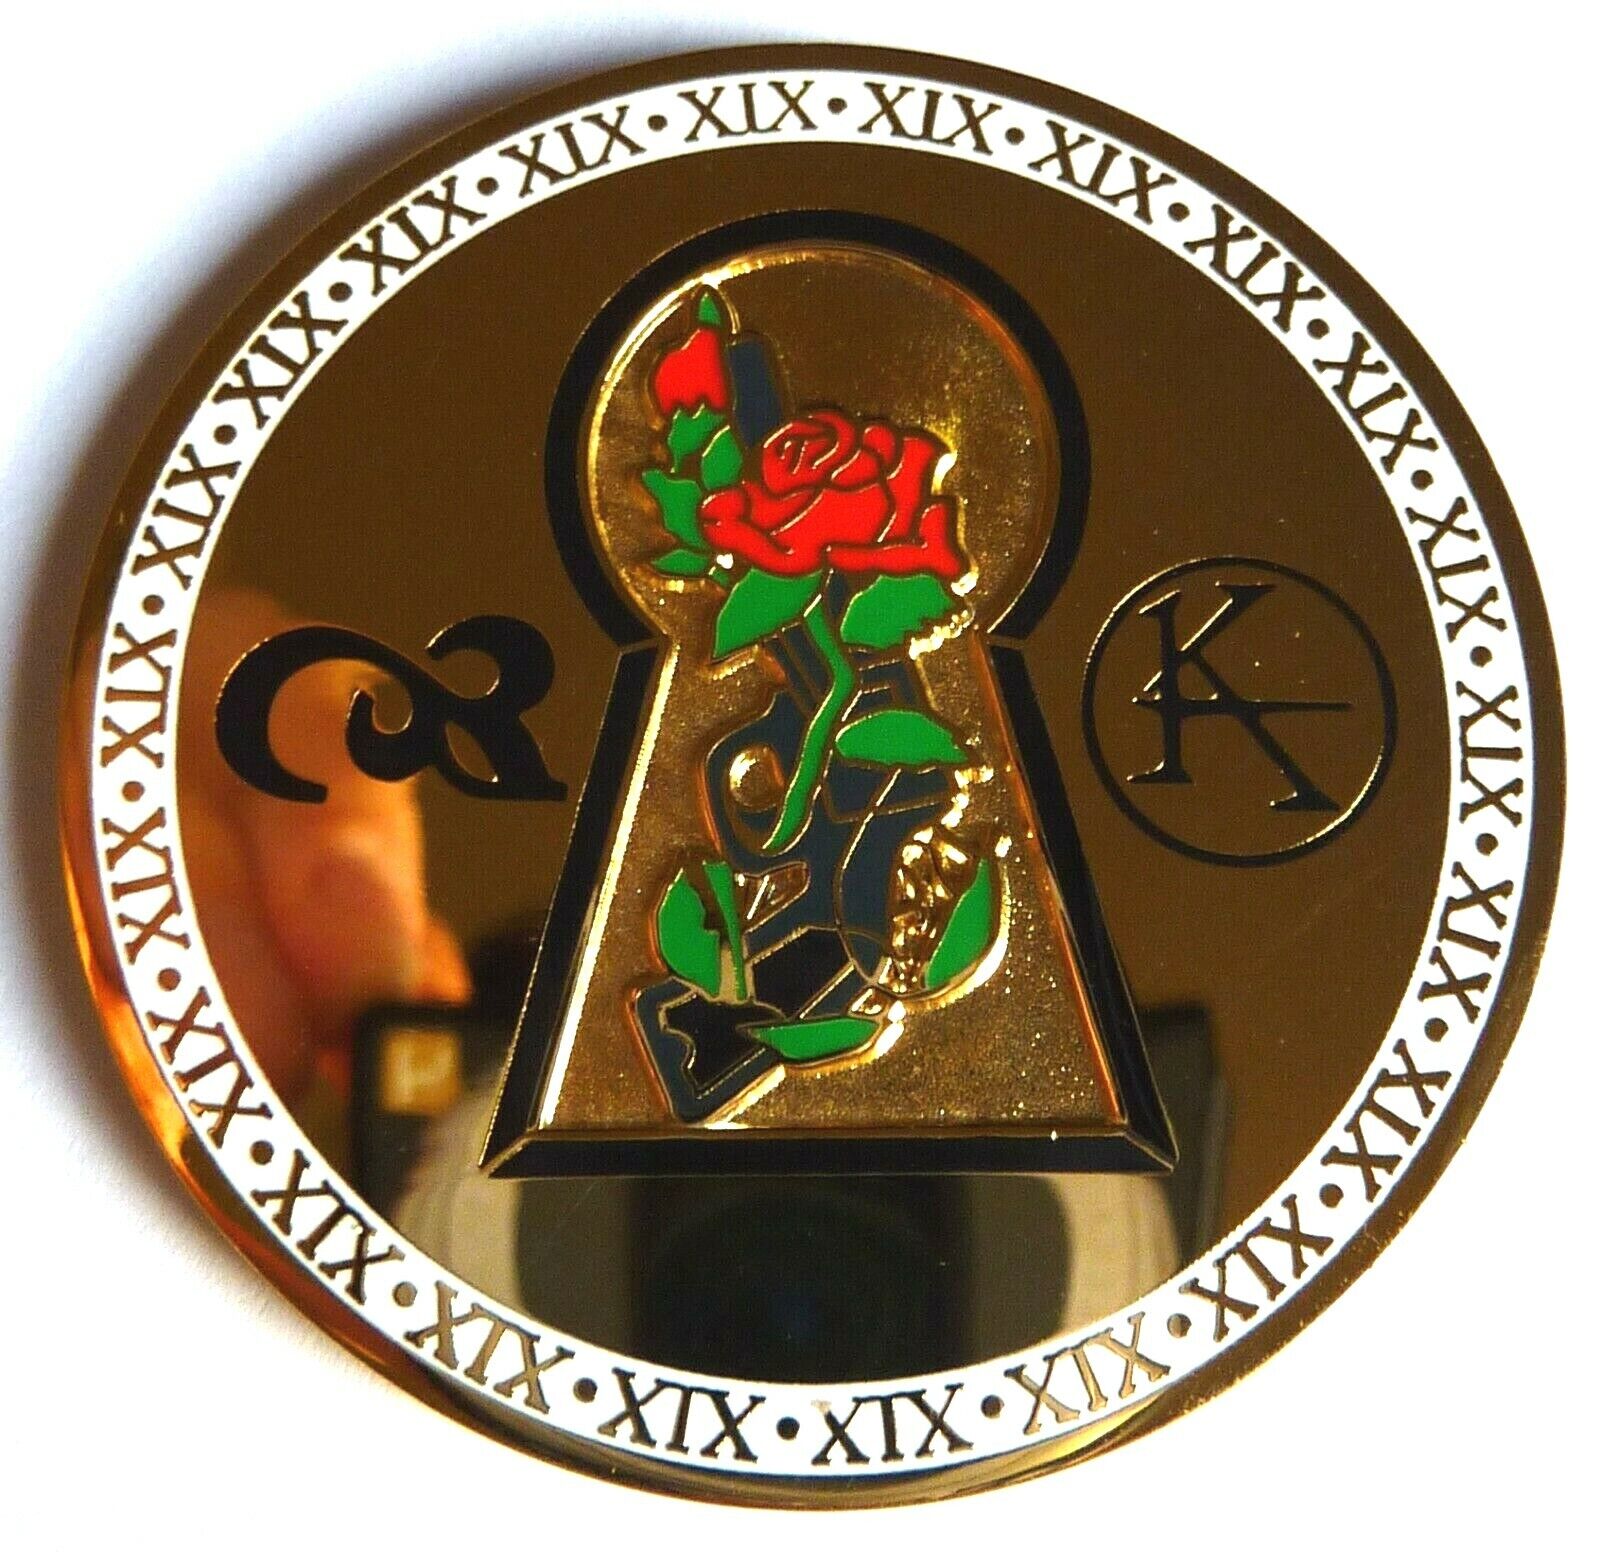 Dark Tower Stephen King Keyhole Rose Keyhole Beams GOLD Challenge Coin